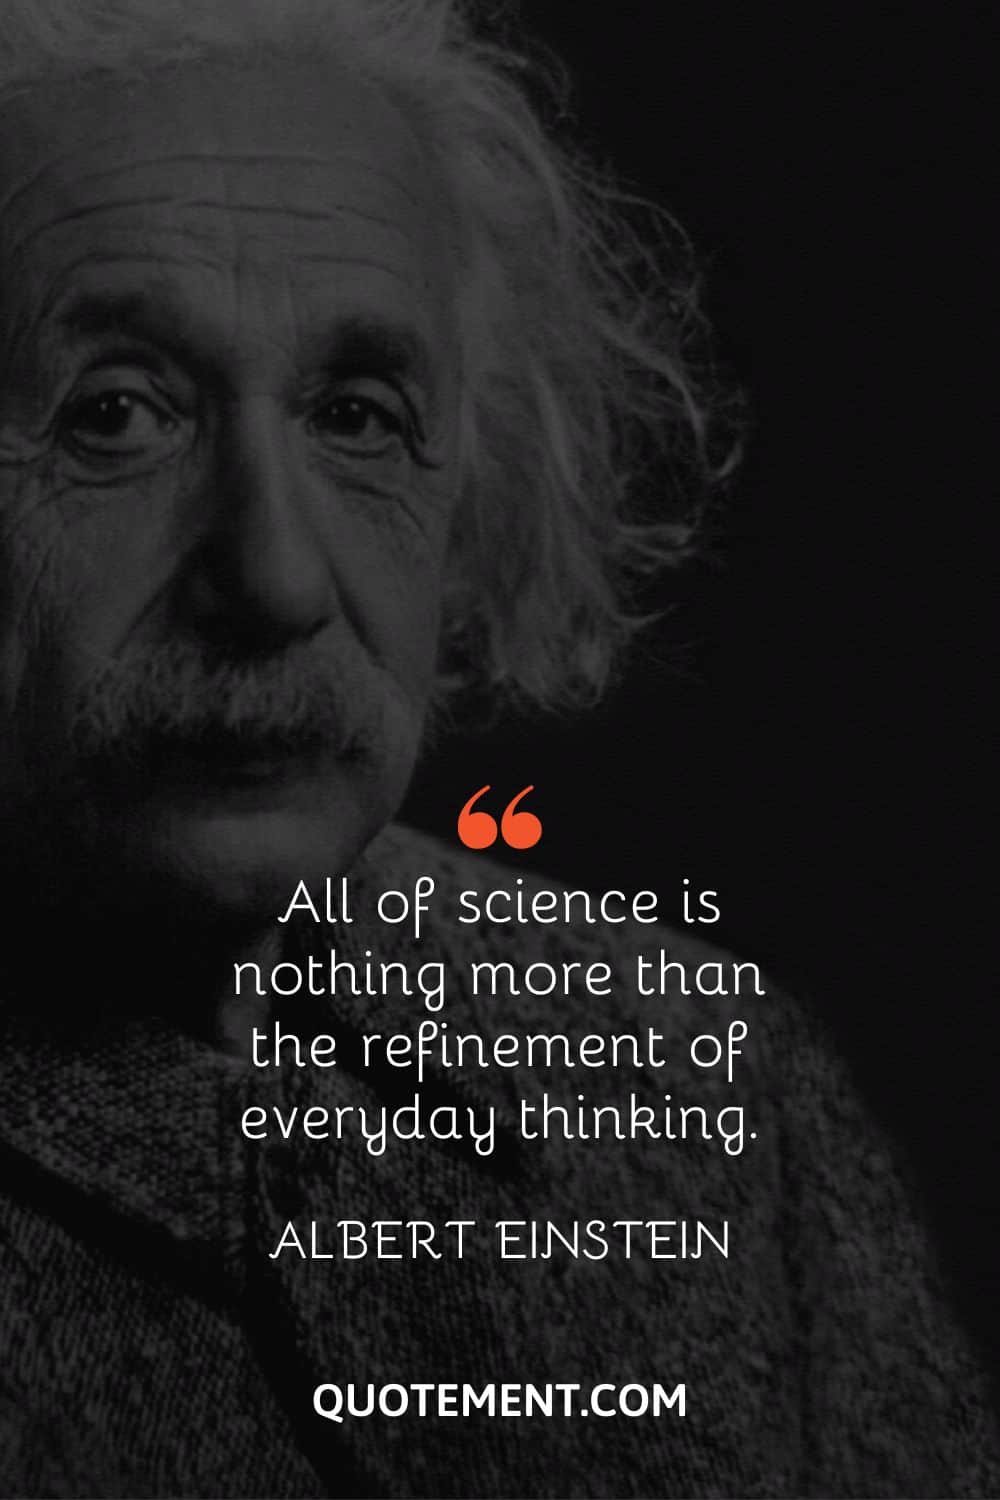 All of science is nothing more than the refinement of everyday thinking